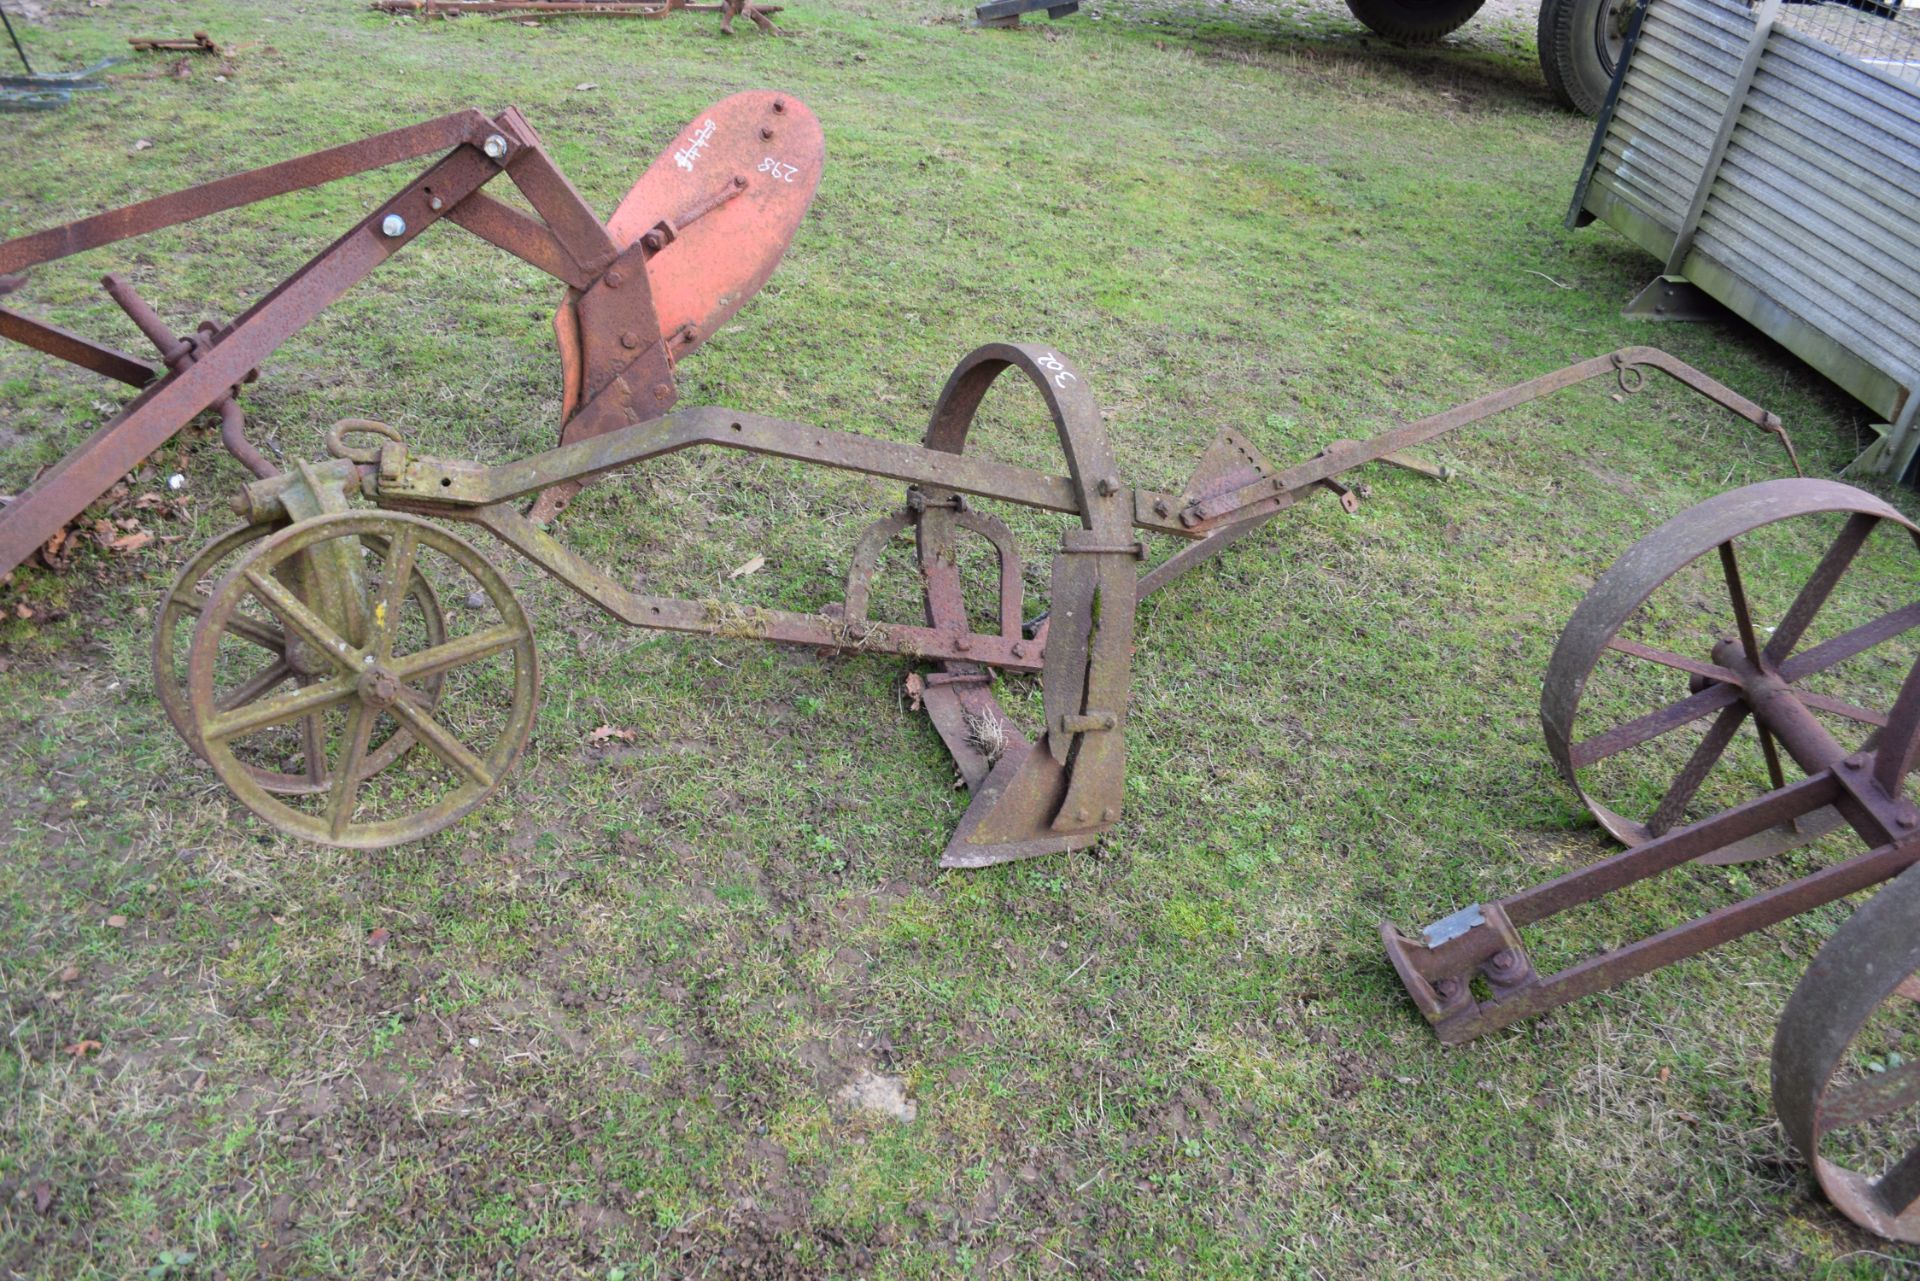 Vintage iron horse-drawn plough or cultivator (a/f)